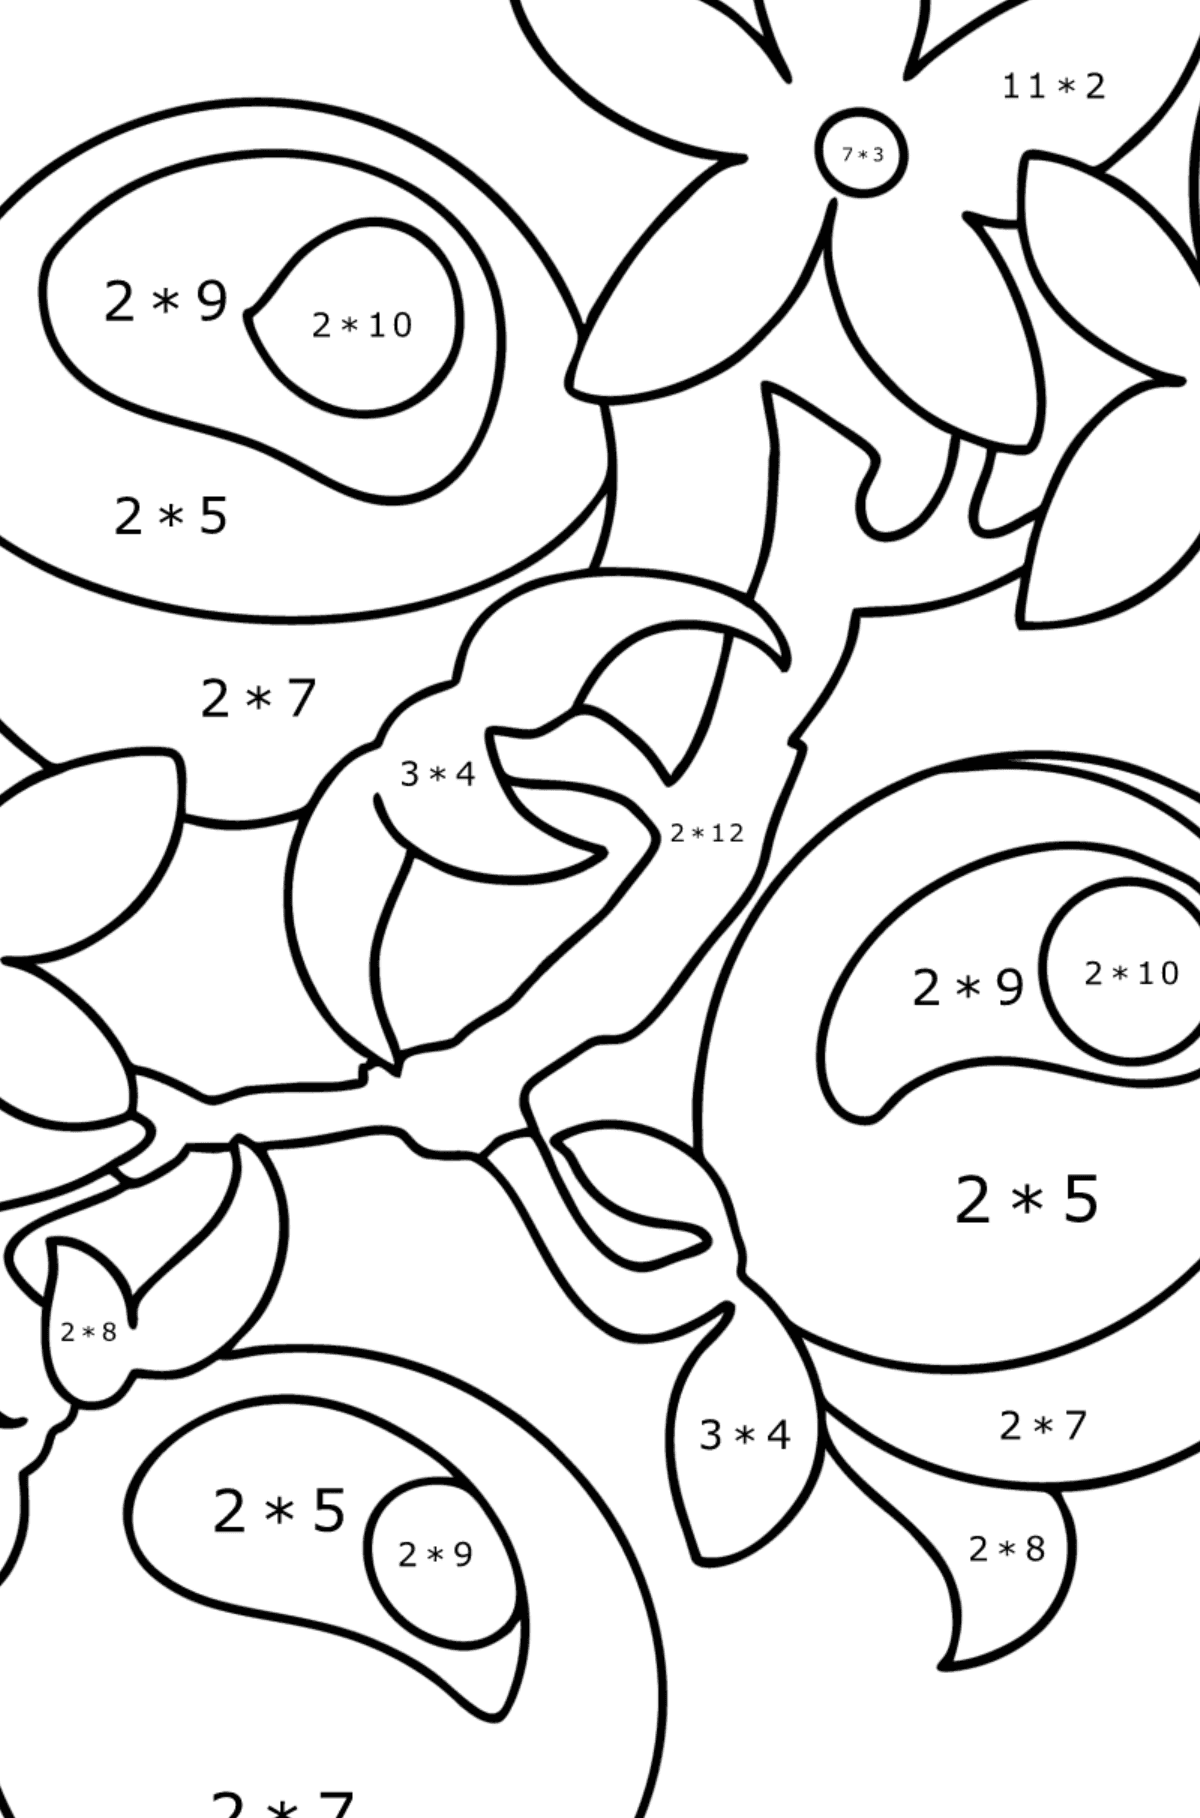 Tomatoes on the Branch сoloring page - Math Coloring - Multiplication for Kids